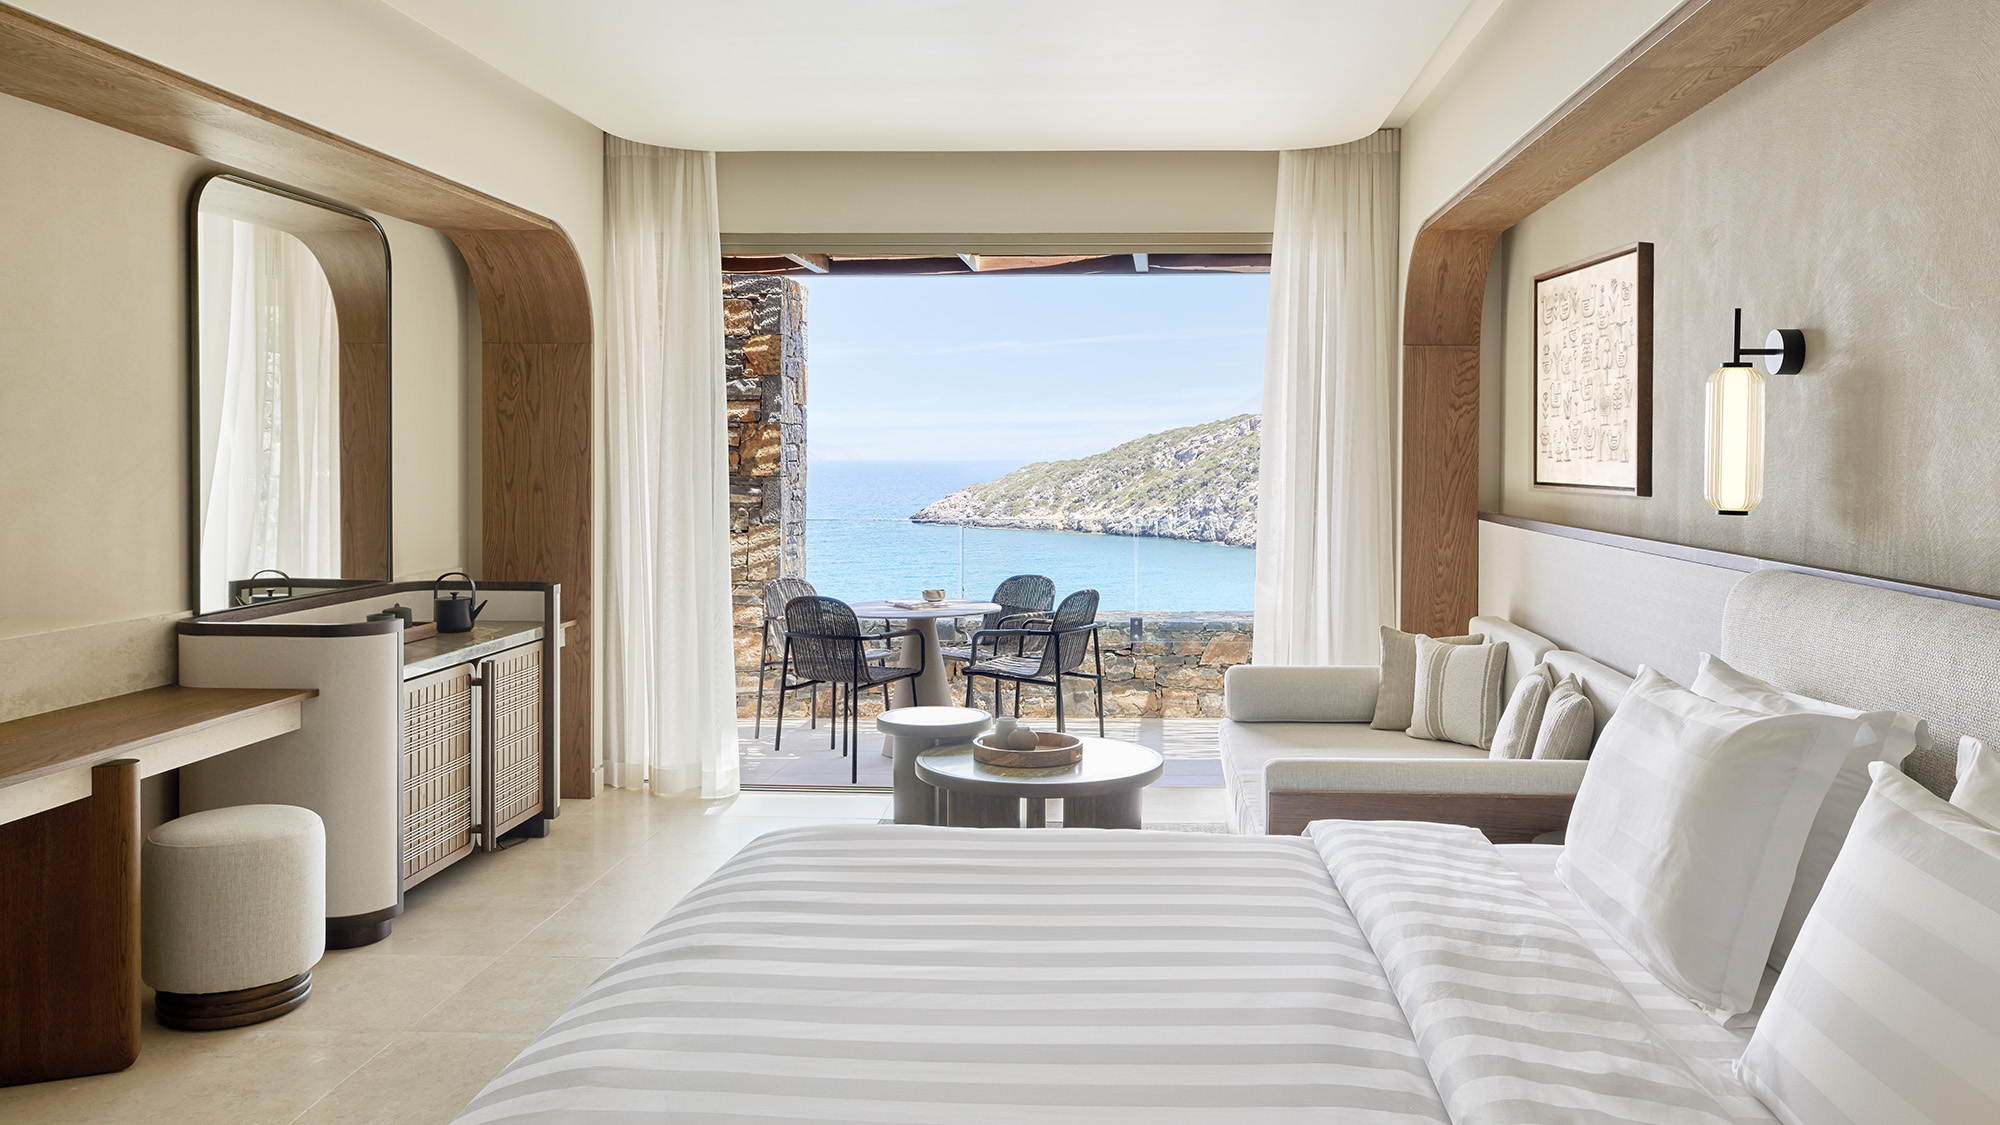 See the First Images of Daios Cove’s New ‘The Collection’ Suites